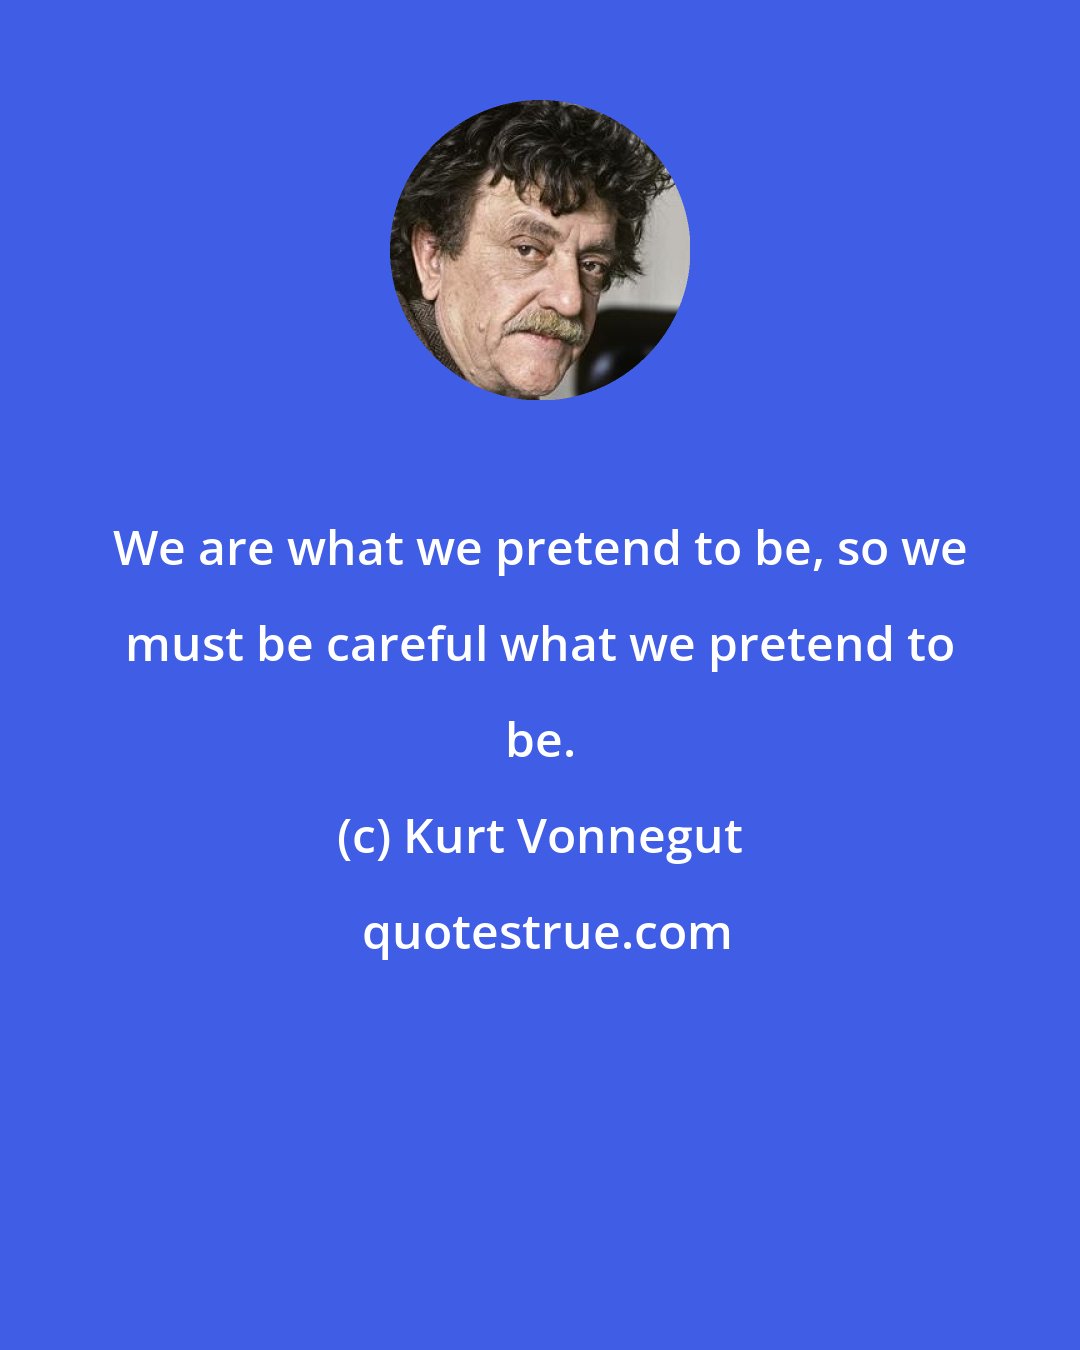 Kurt Vonnegut: We are what we pretend to be, so we must be careful what we pretend to be.